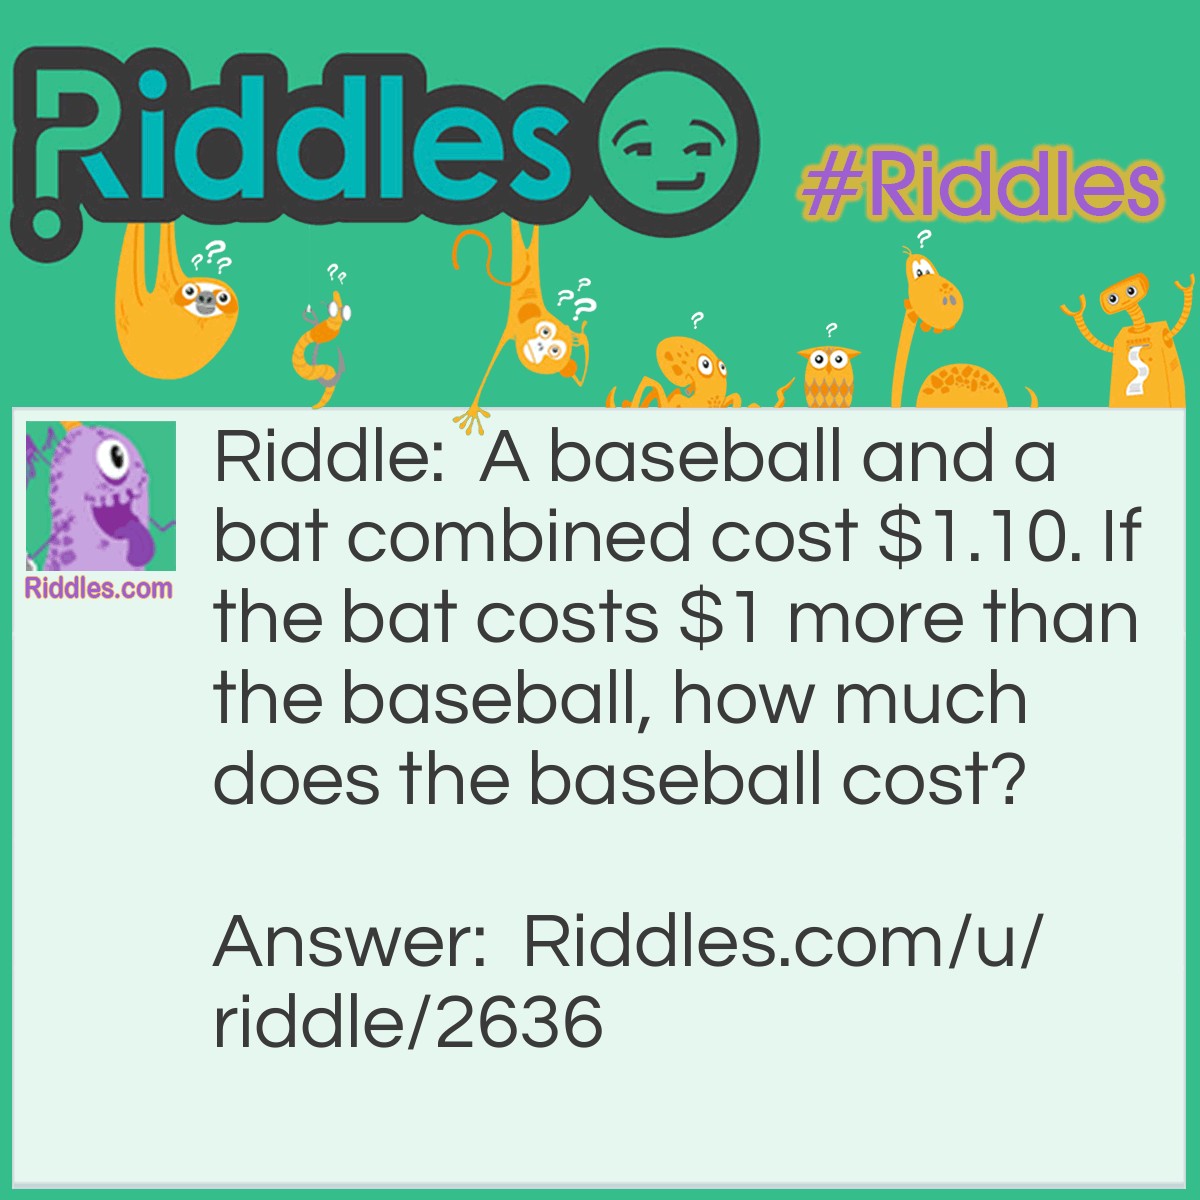 Riddle: A baseball and a bat combined cost $1.10. If the bat costs $1 more than the baseball, how much does the baseball cost? Answer: If you said $0.10, you're wrong. The answer is $0.05 because the bat, costing $1 more than the baseball, will cost $1.05. $1.05+$0.05 is $1.10.